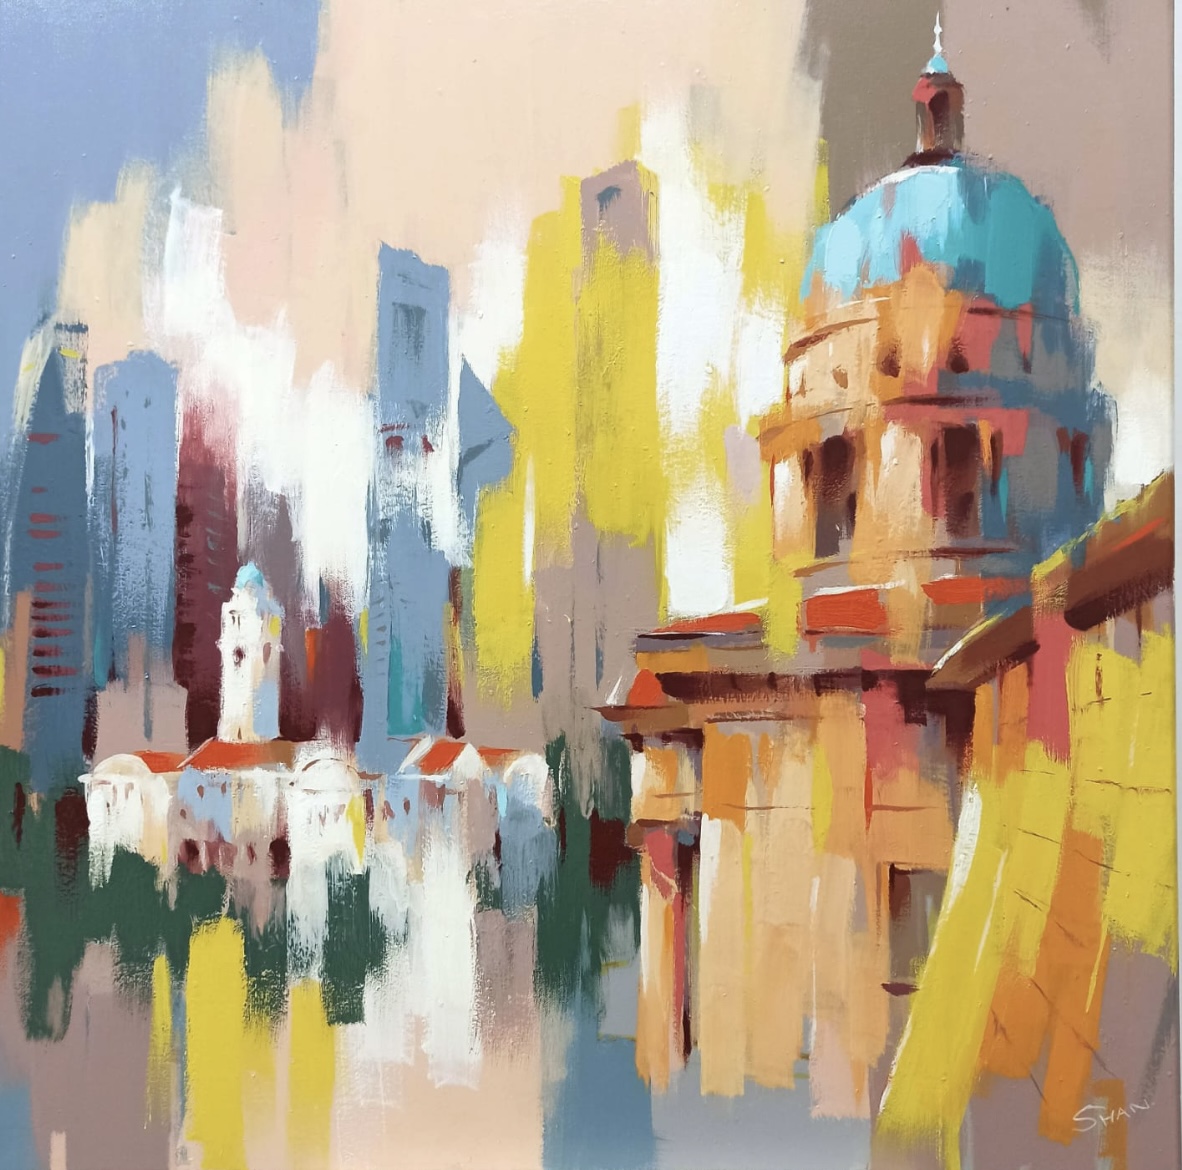 urban, cityscape, National gallery cityscape, Oil on canvas, painting, Yap Wen Shan